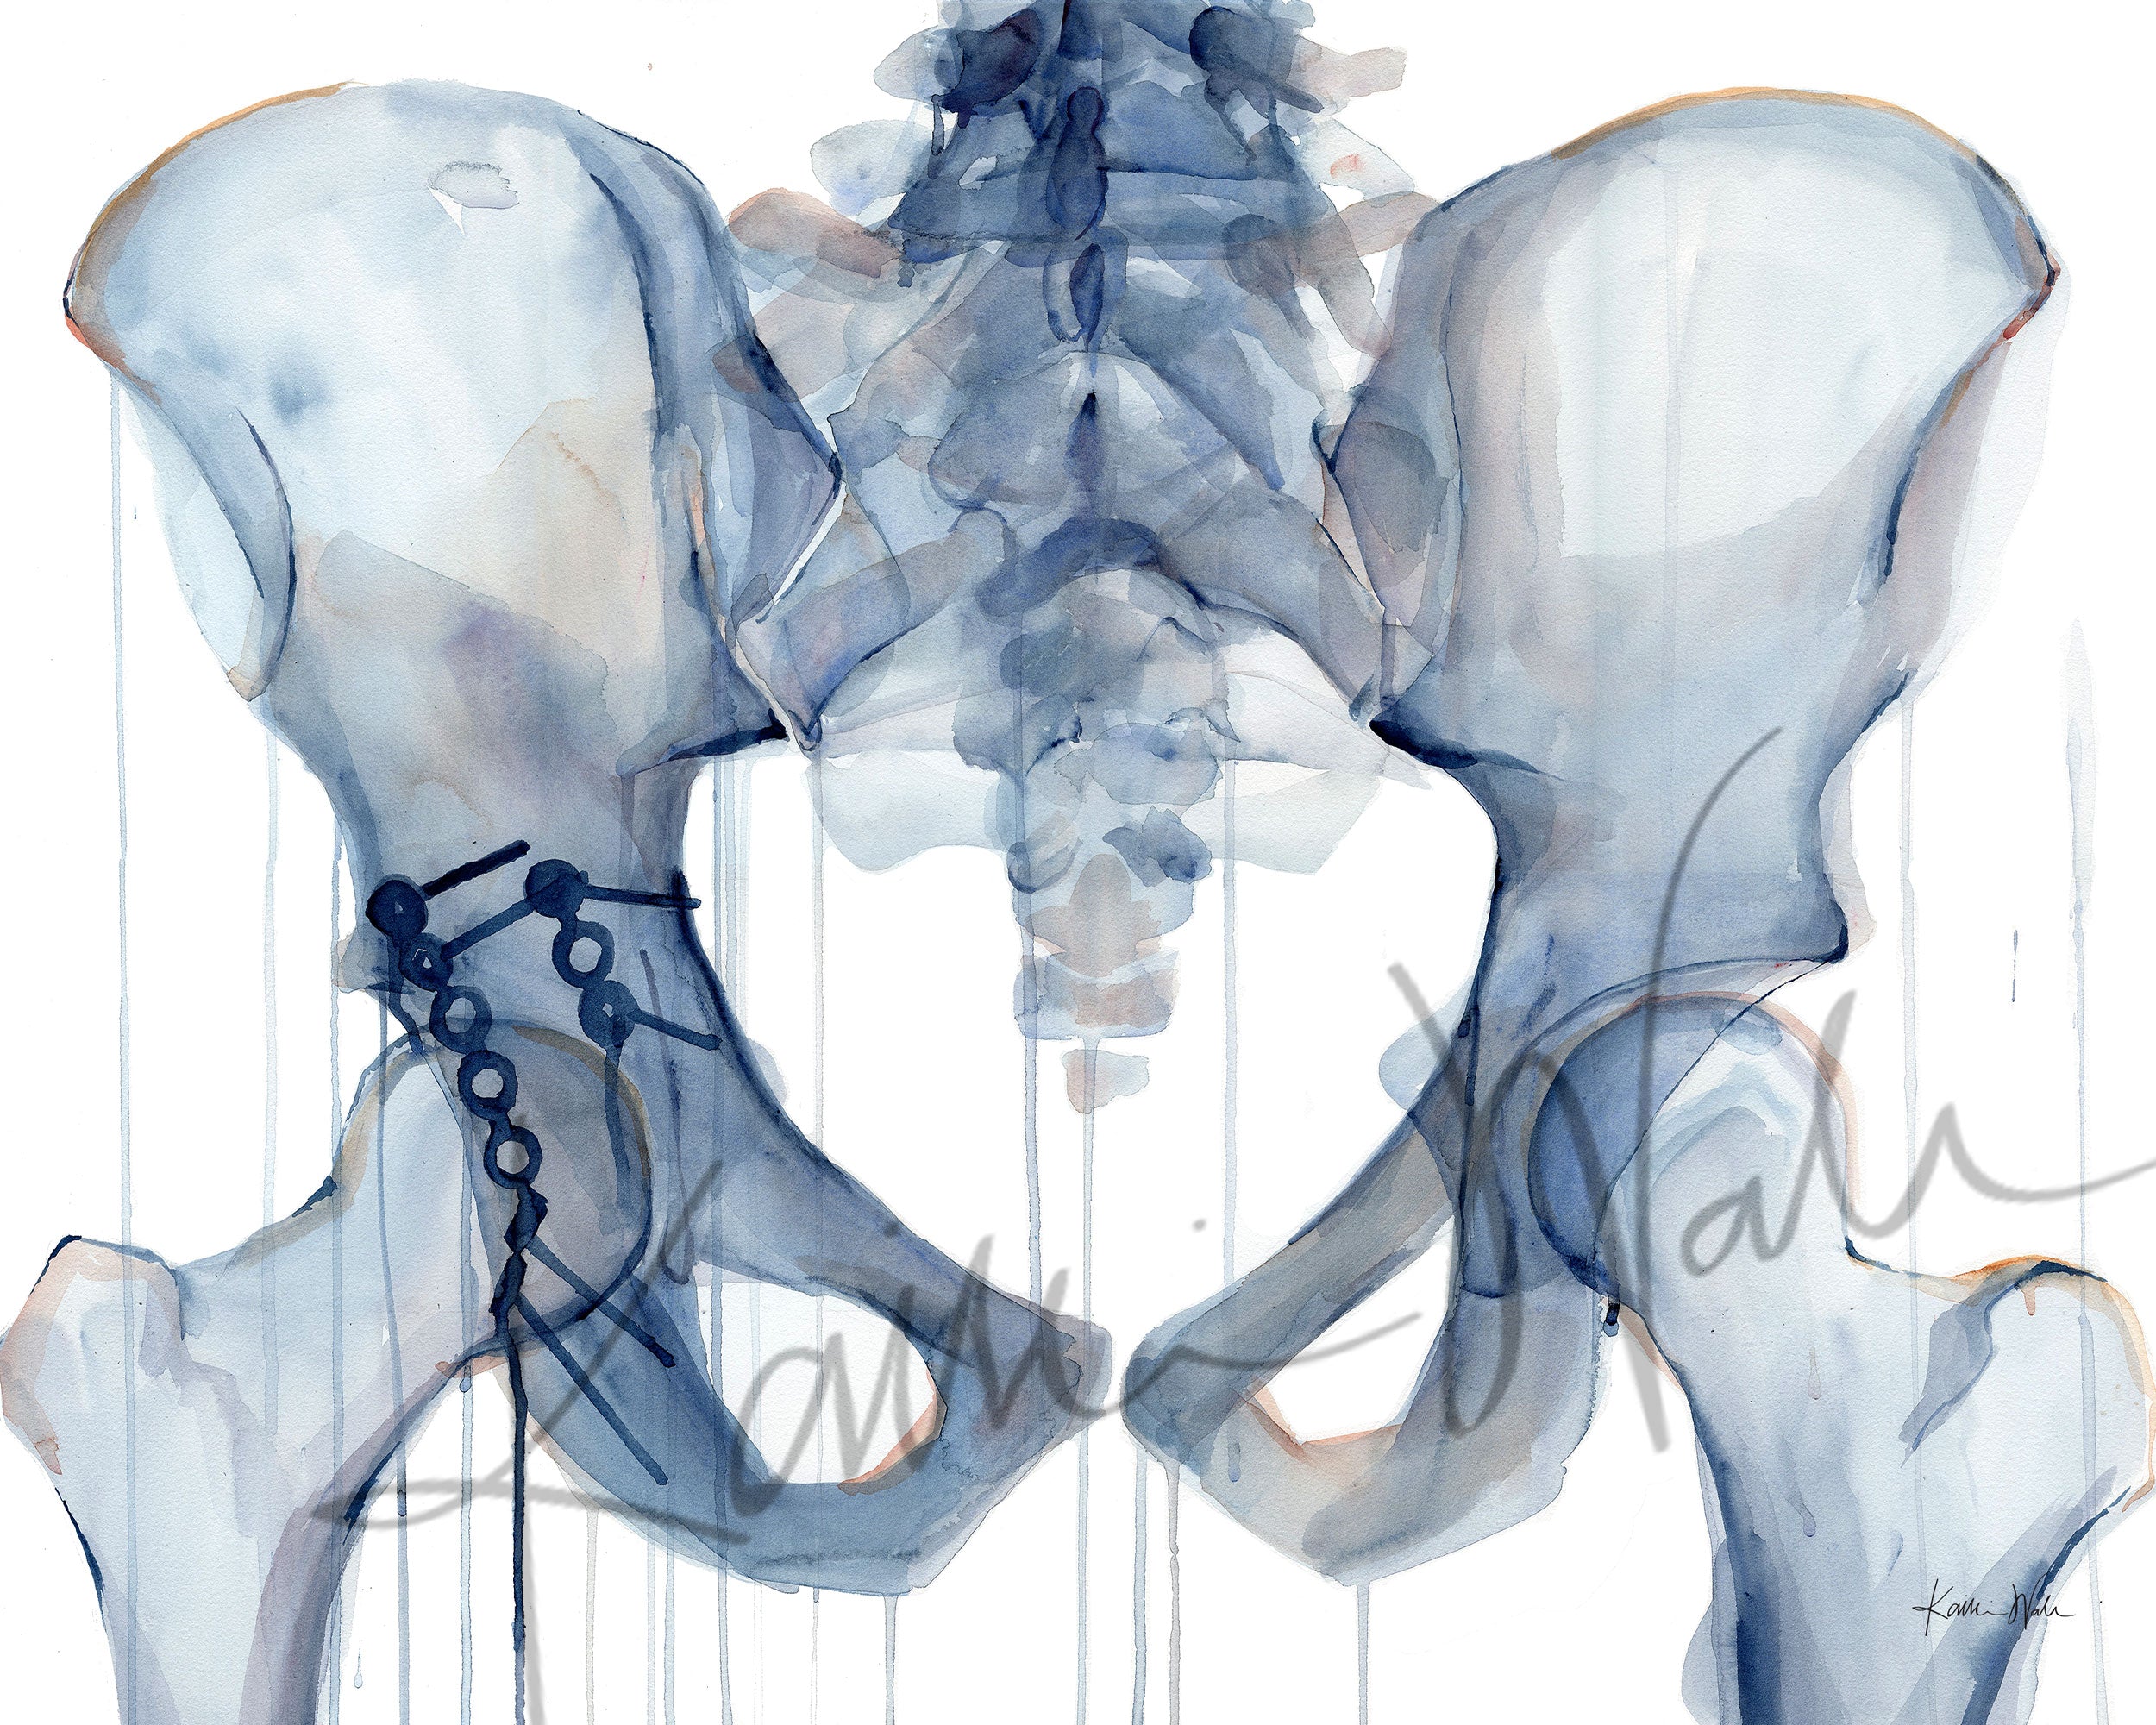 Unframed watercolor painting of a hip repair with pinning.